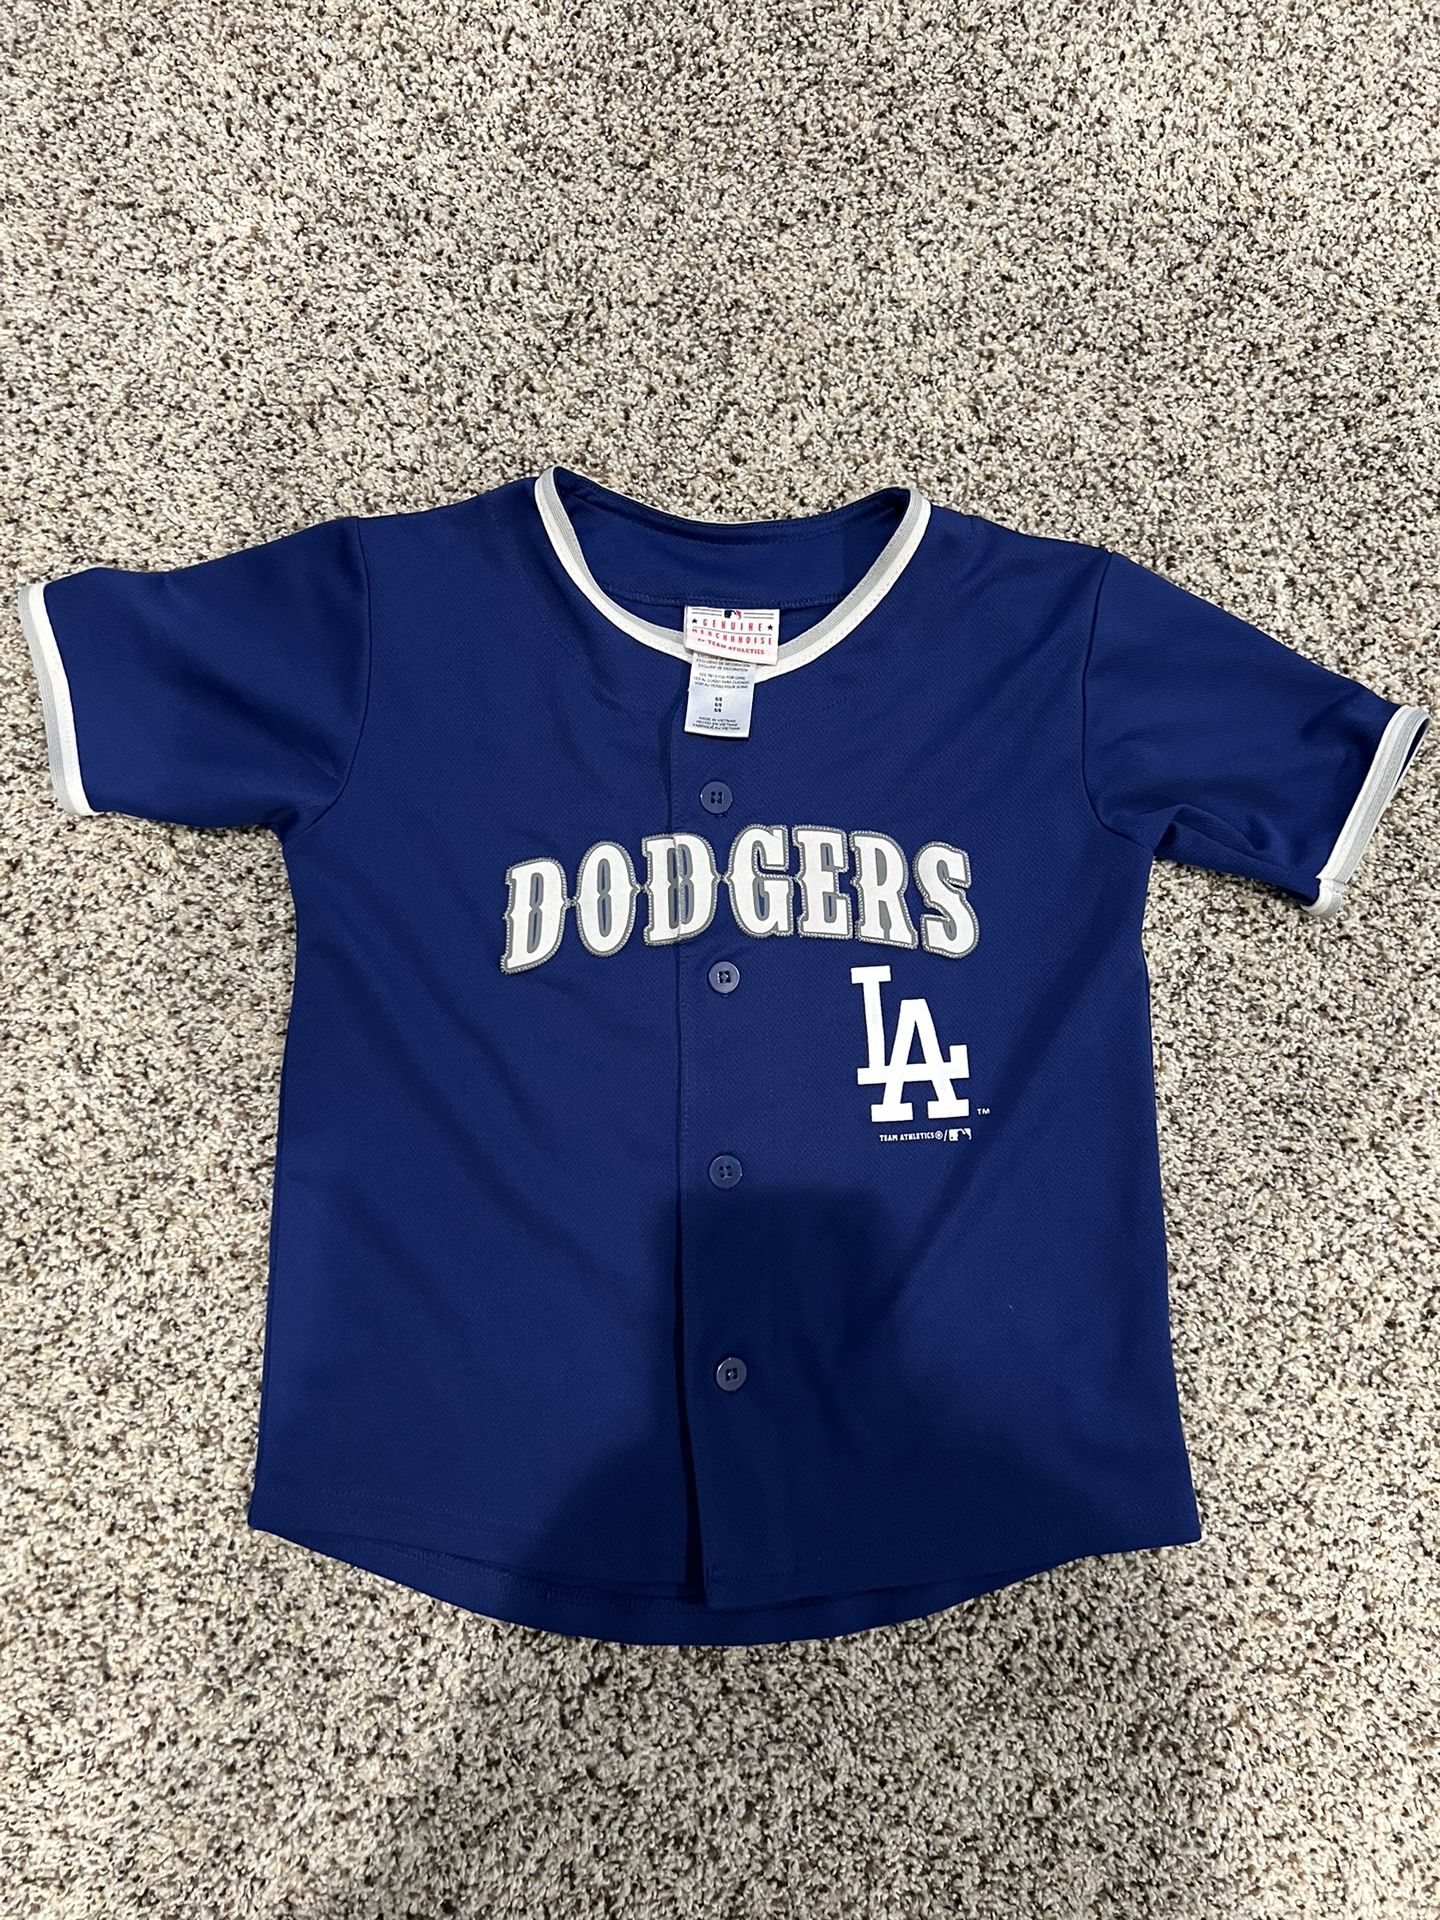 Dodgers Jersey Youth Size 6/8